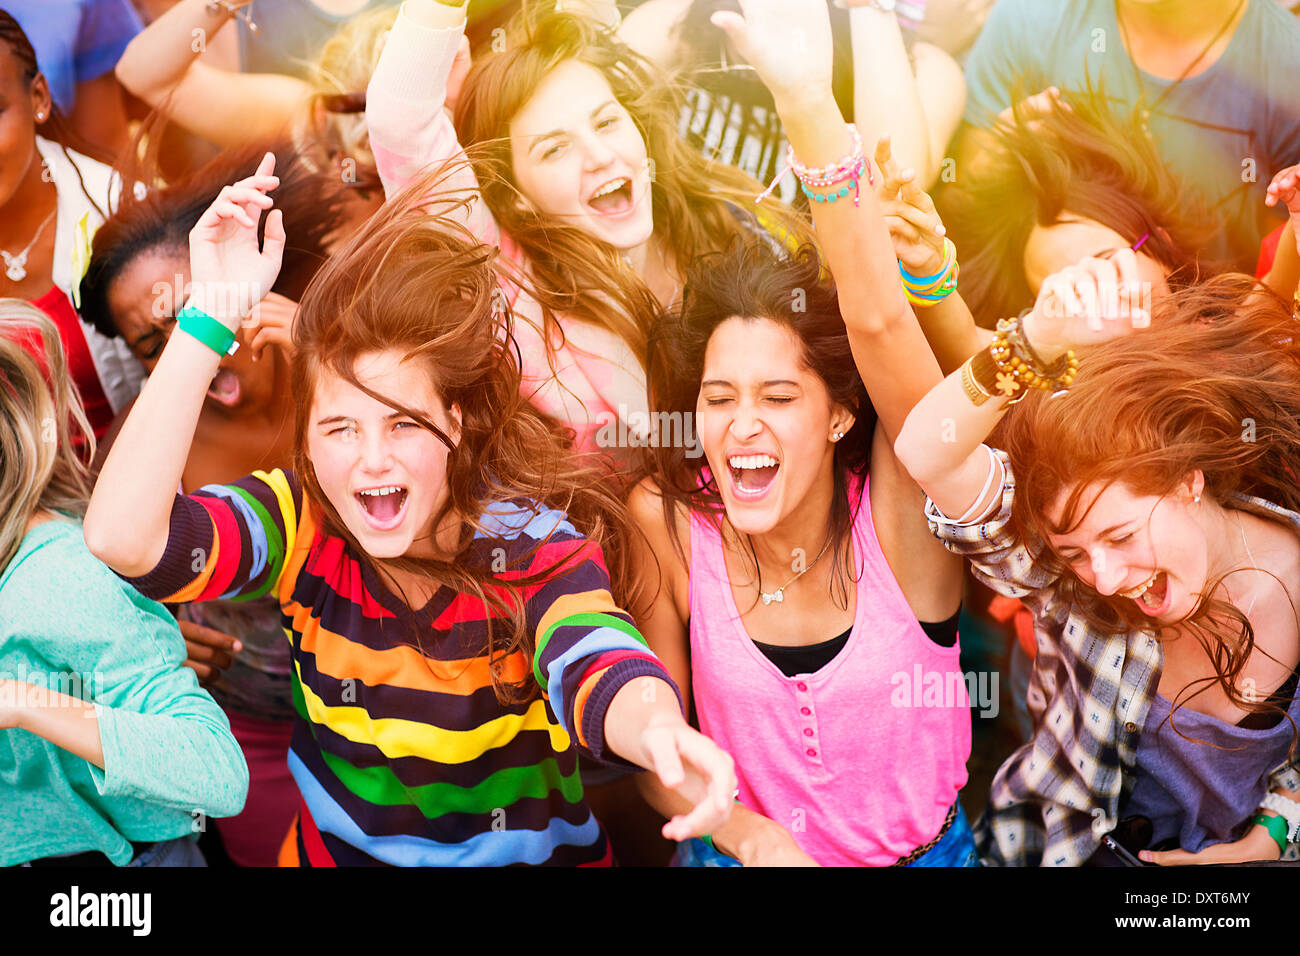 Cheering fans at music festival Stock Photo